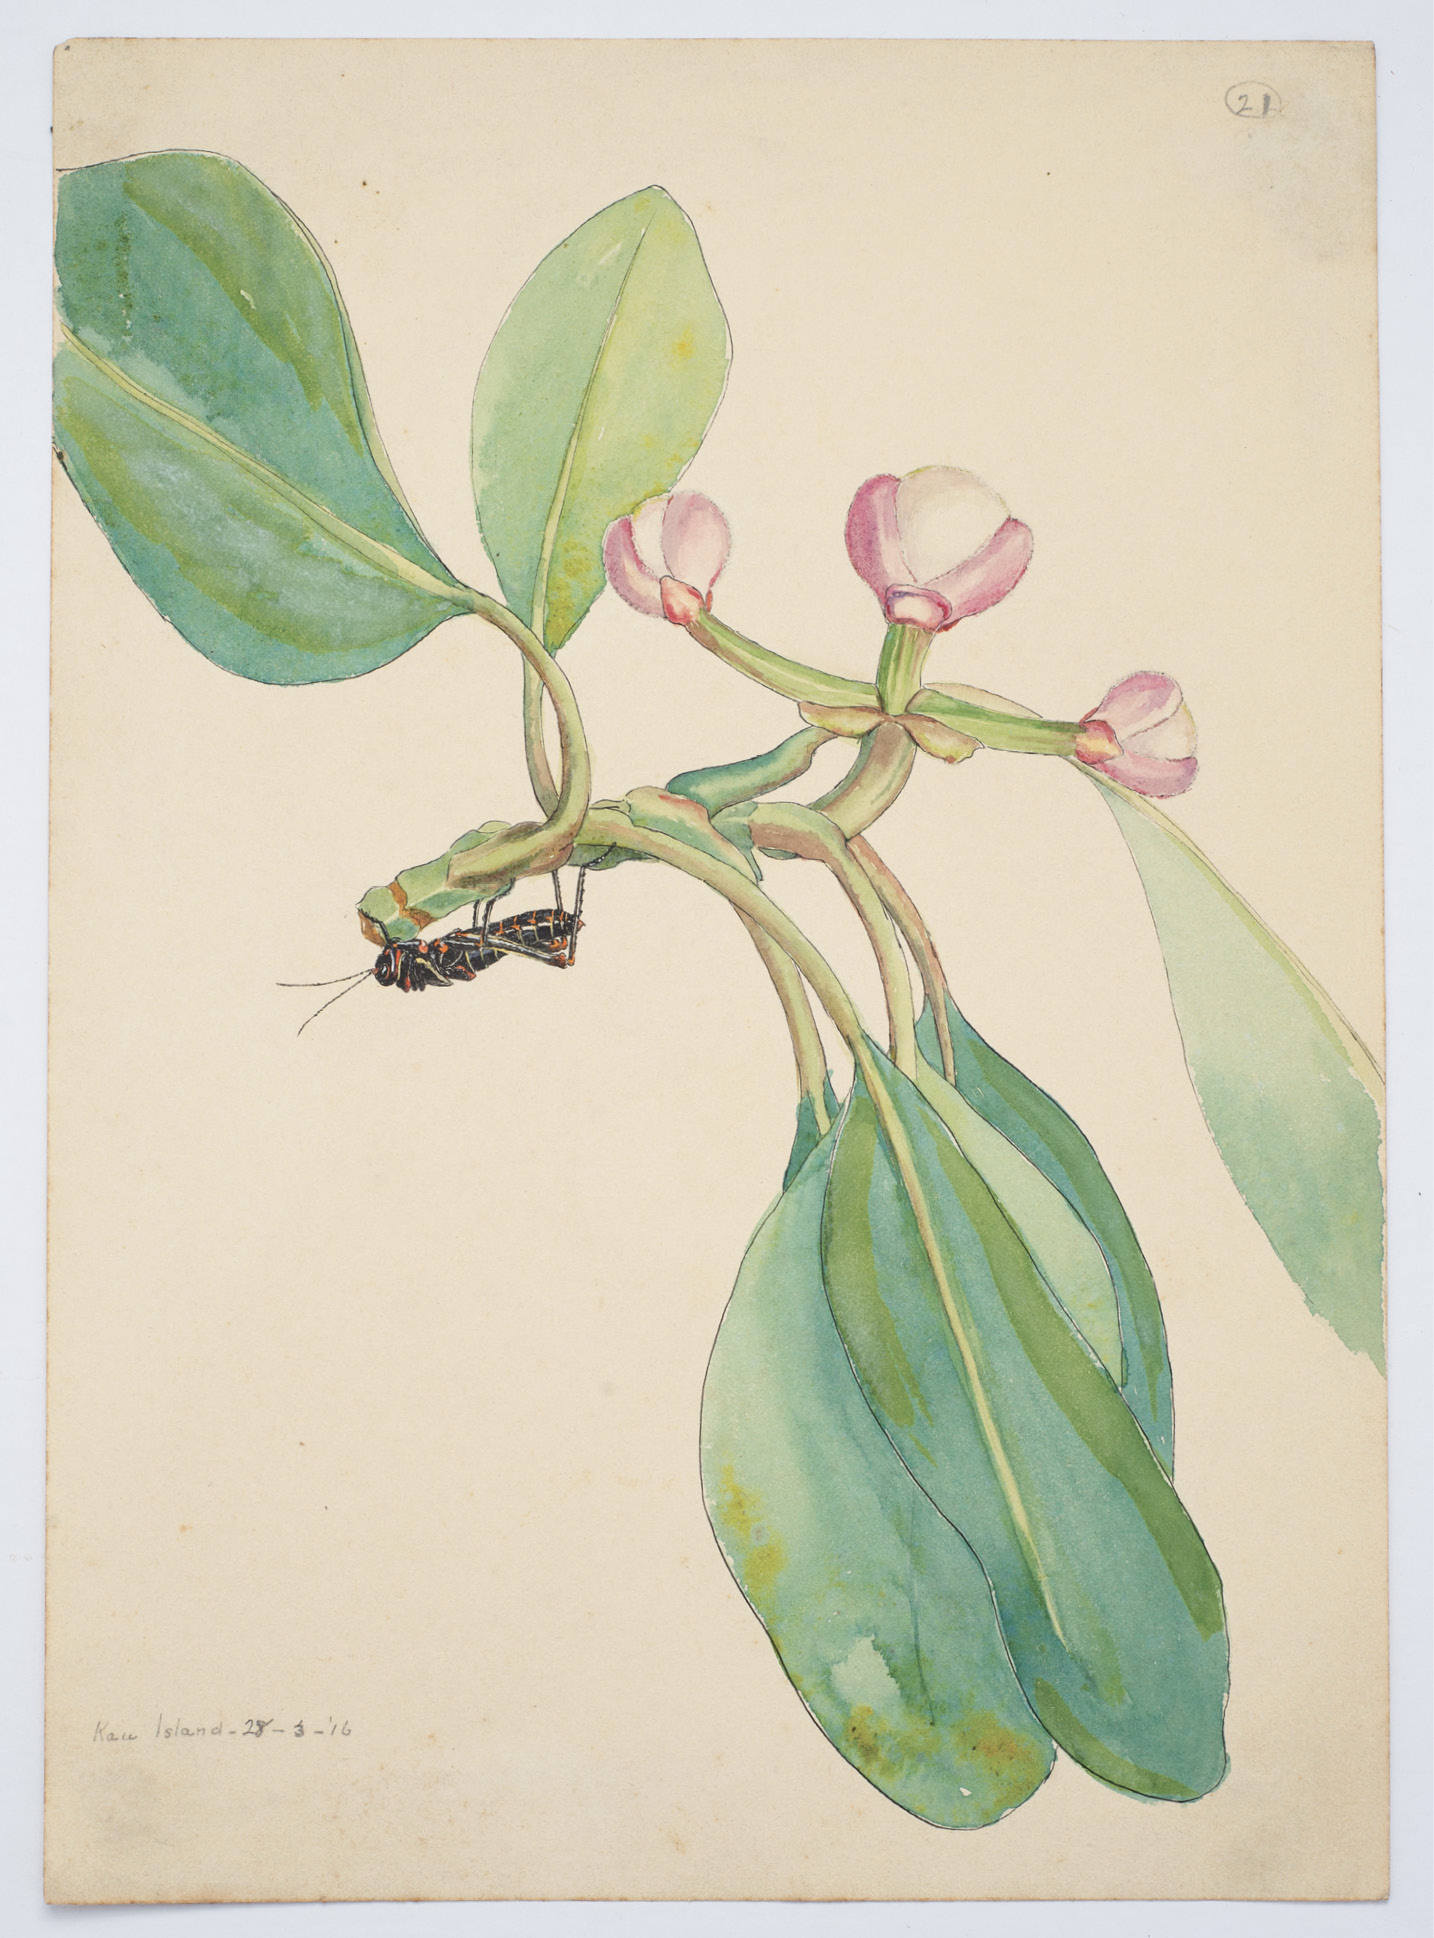 Taylor’s 1916 watercolor of an unidentified plant, possibly Clusia grandiflora